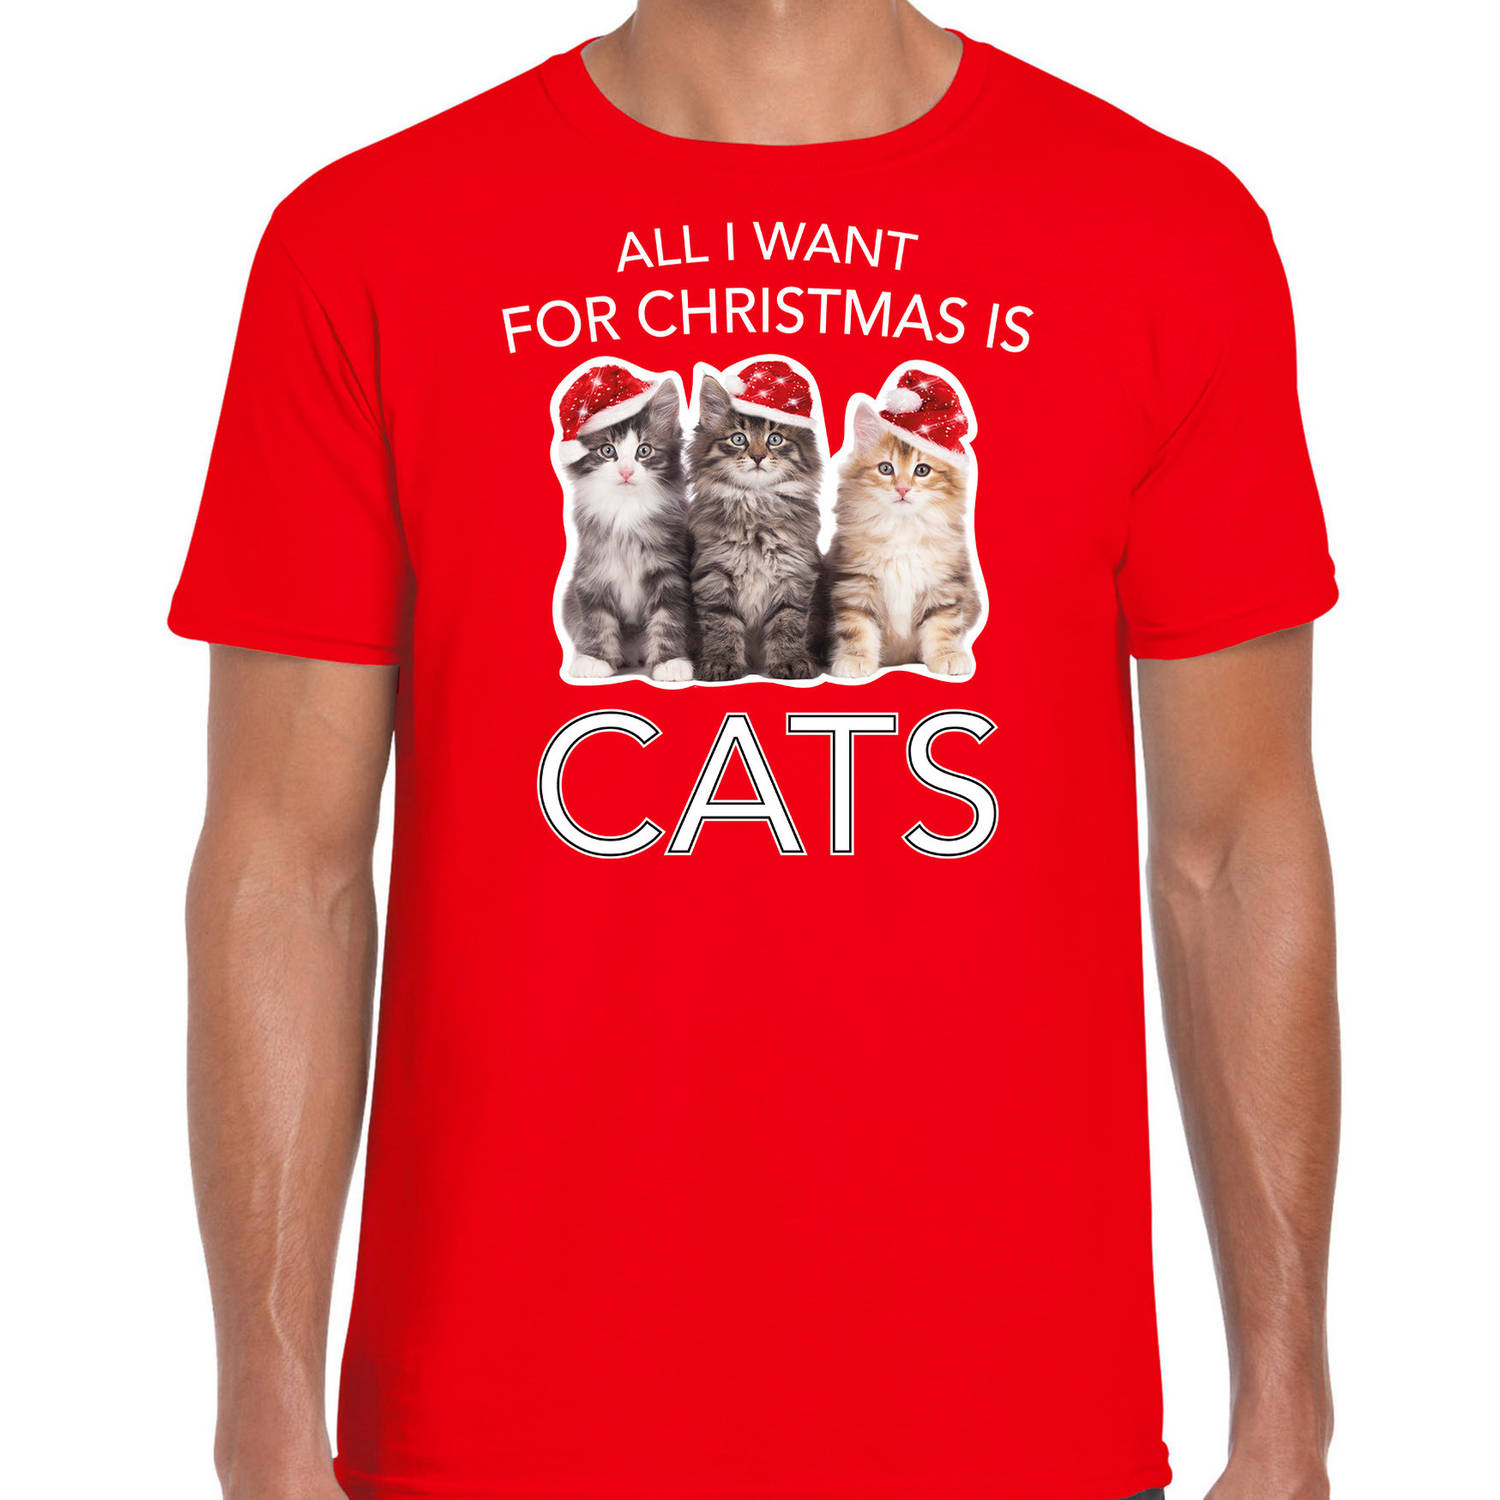 Rood Kerst shirt/ Kerstkleding All i want for Christmas is cats voor heren 2XL - kerst t-shirts